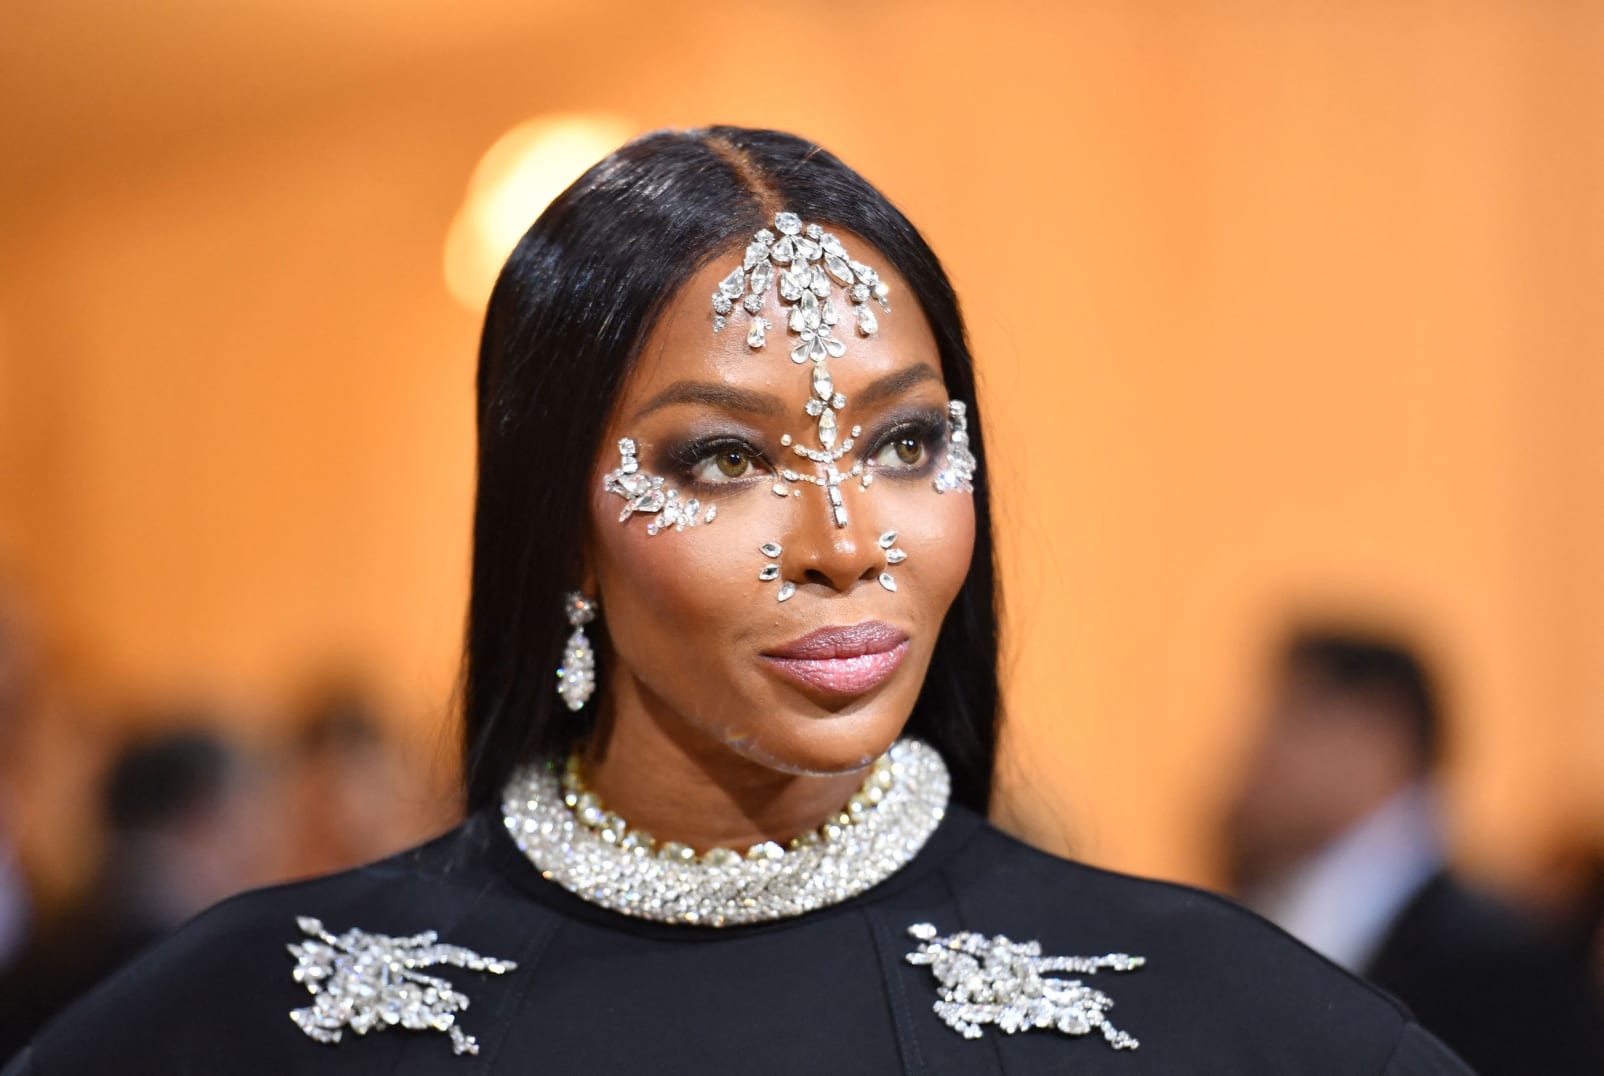 Supermodel Naomi Campbell chose an equestrian-printed custom Burberry look by Ricardo Tisci for the event, coupled with embellished gloves matched to her dress and face jewels. 